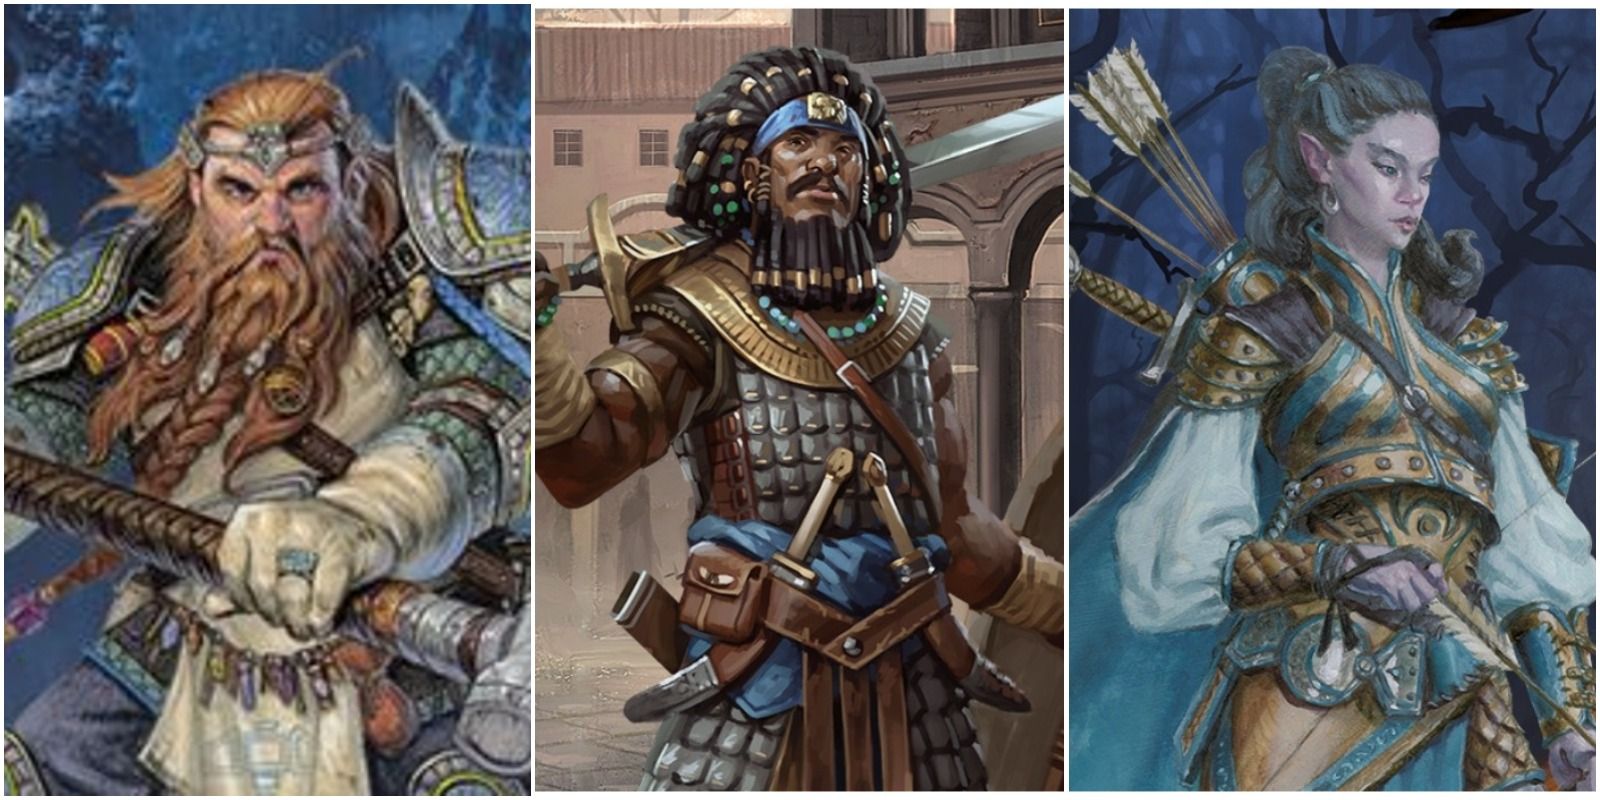 A Cleric, Fighter, and Ranger from D&D artwork